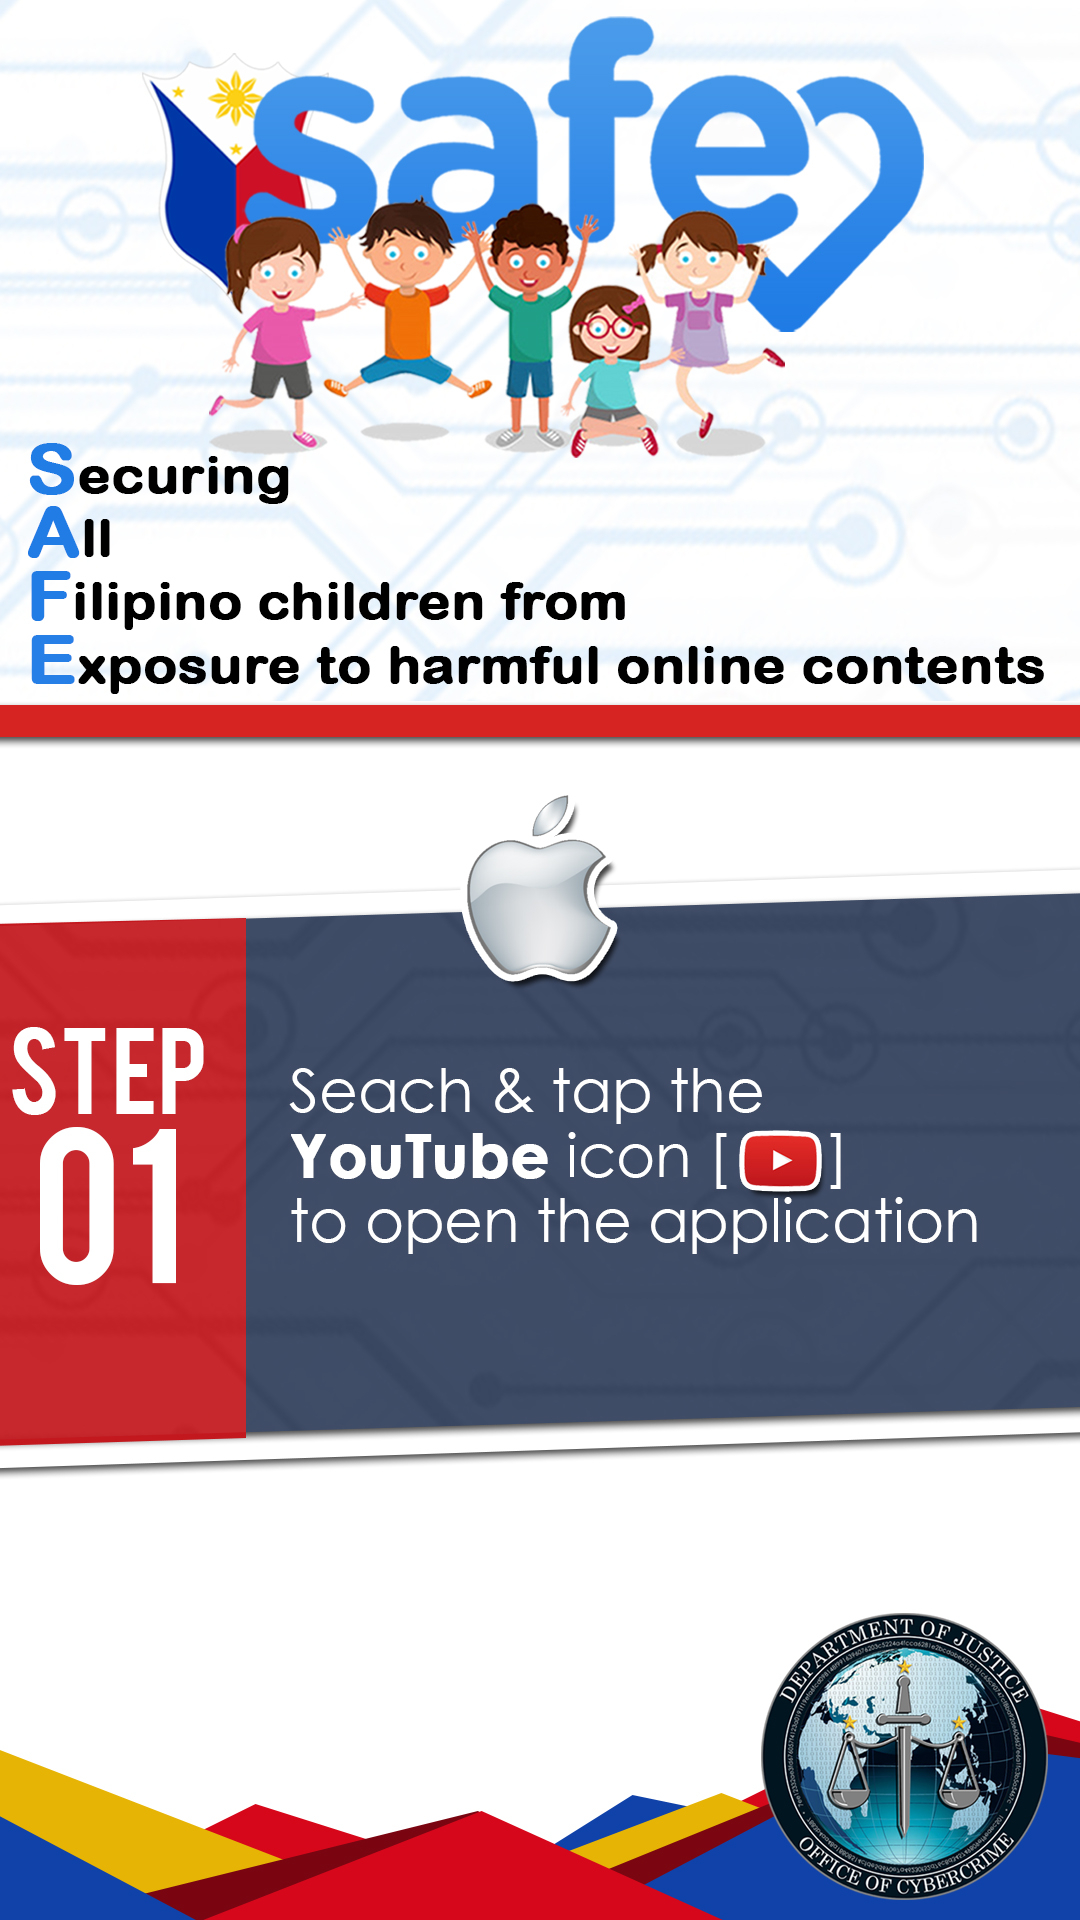 Turn on SAFE Features of Youtube App on IOS Device - Step 1